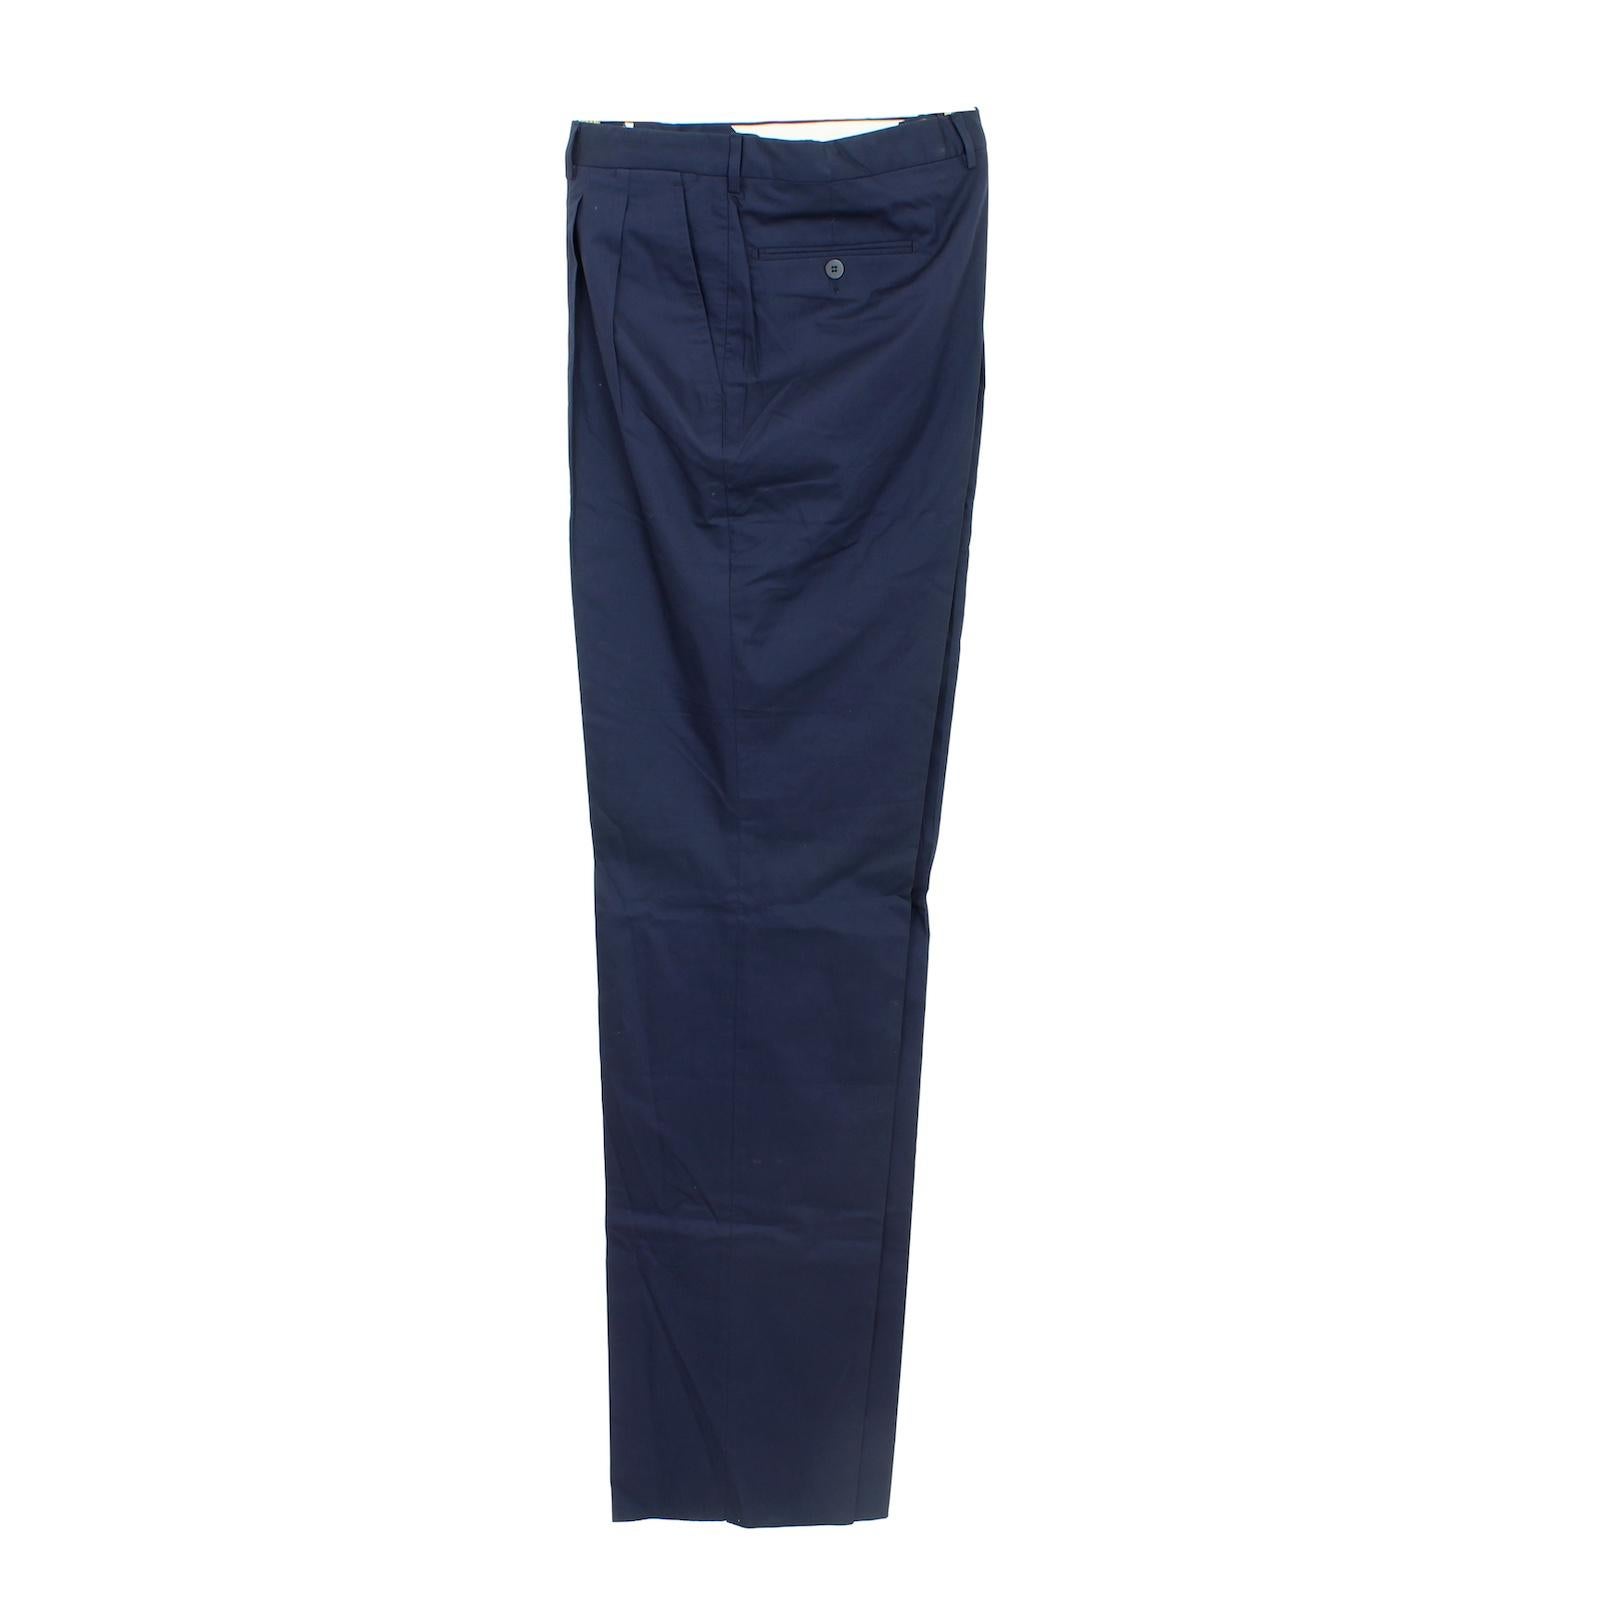 Burberry vintage 90s trousers. Classic model, blue color, 100% cotton fabric. Made in italy. New from warehouse stock.

Size: 58 It 48 Us 48 Uk

Waist: 50 cm
Length: 127 cm
Hem: 24 cm
Inseam length: 97 cm